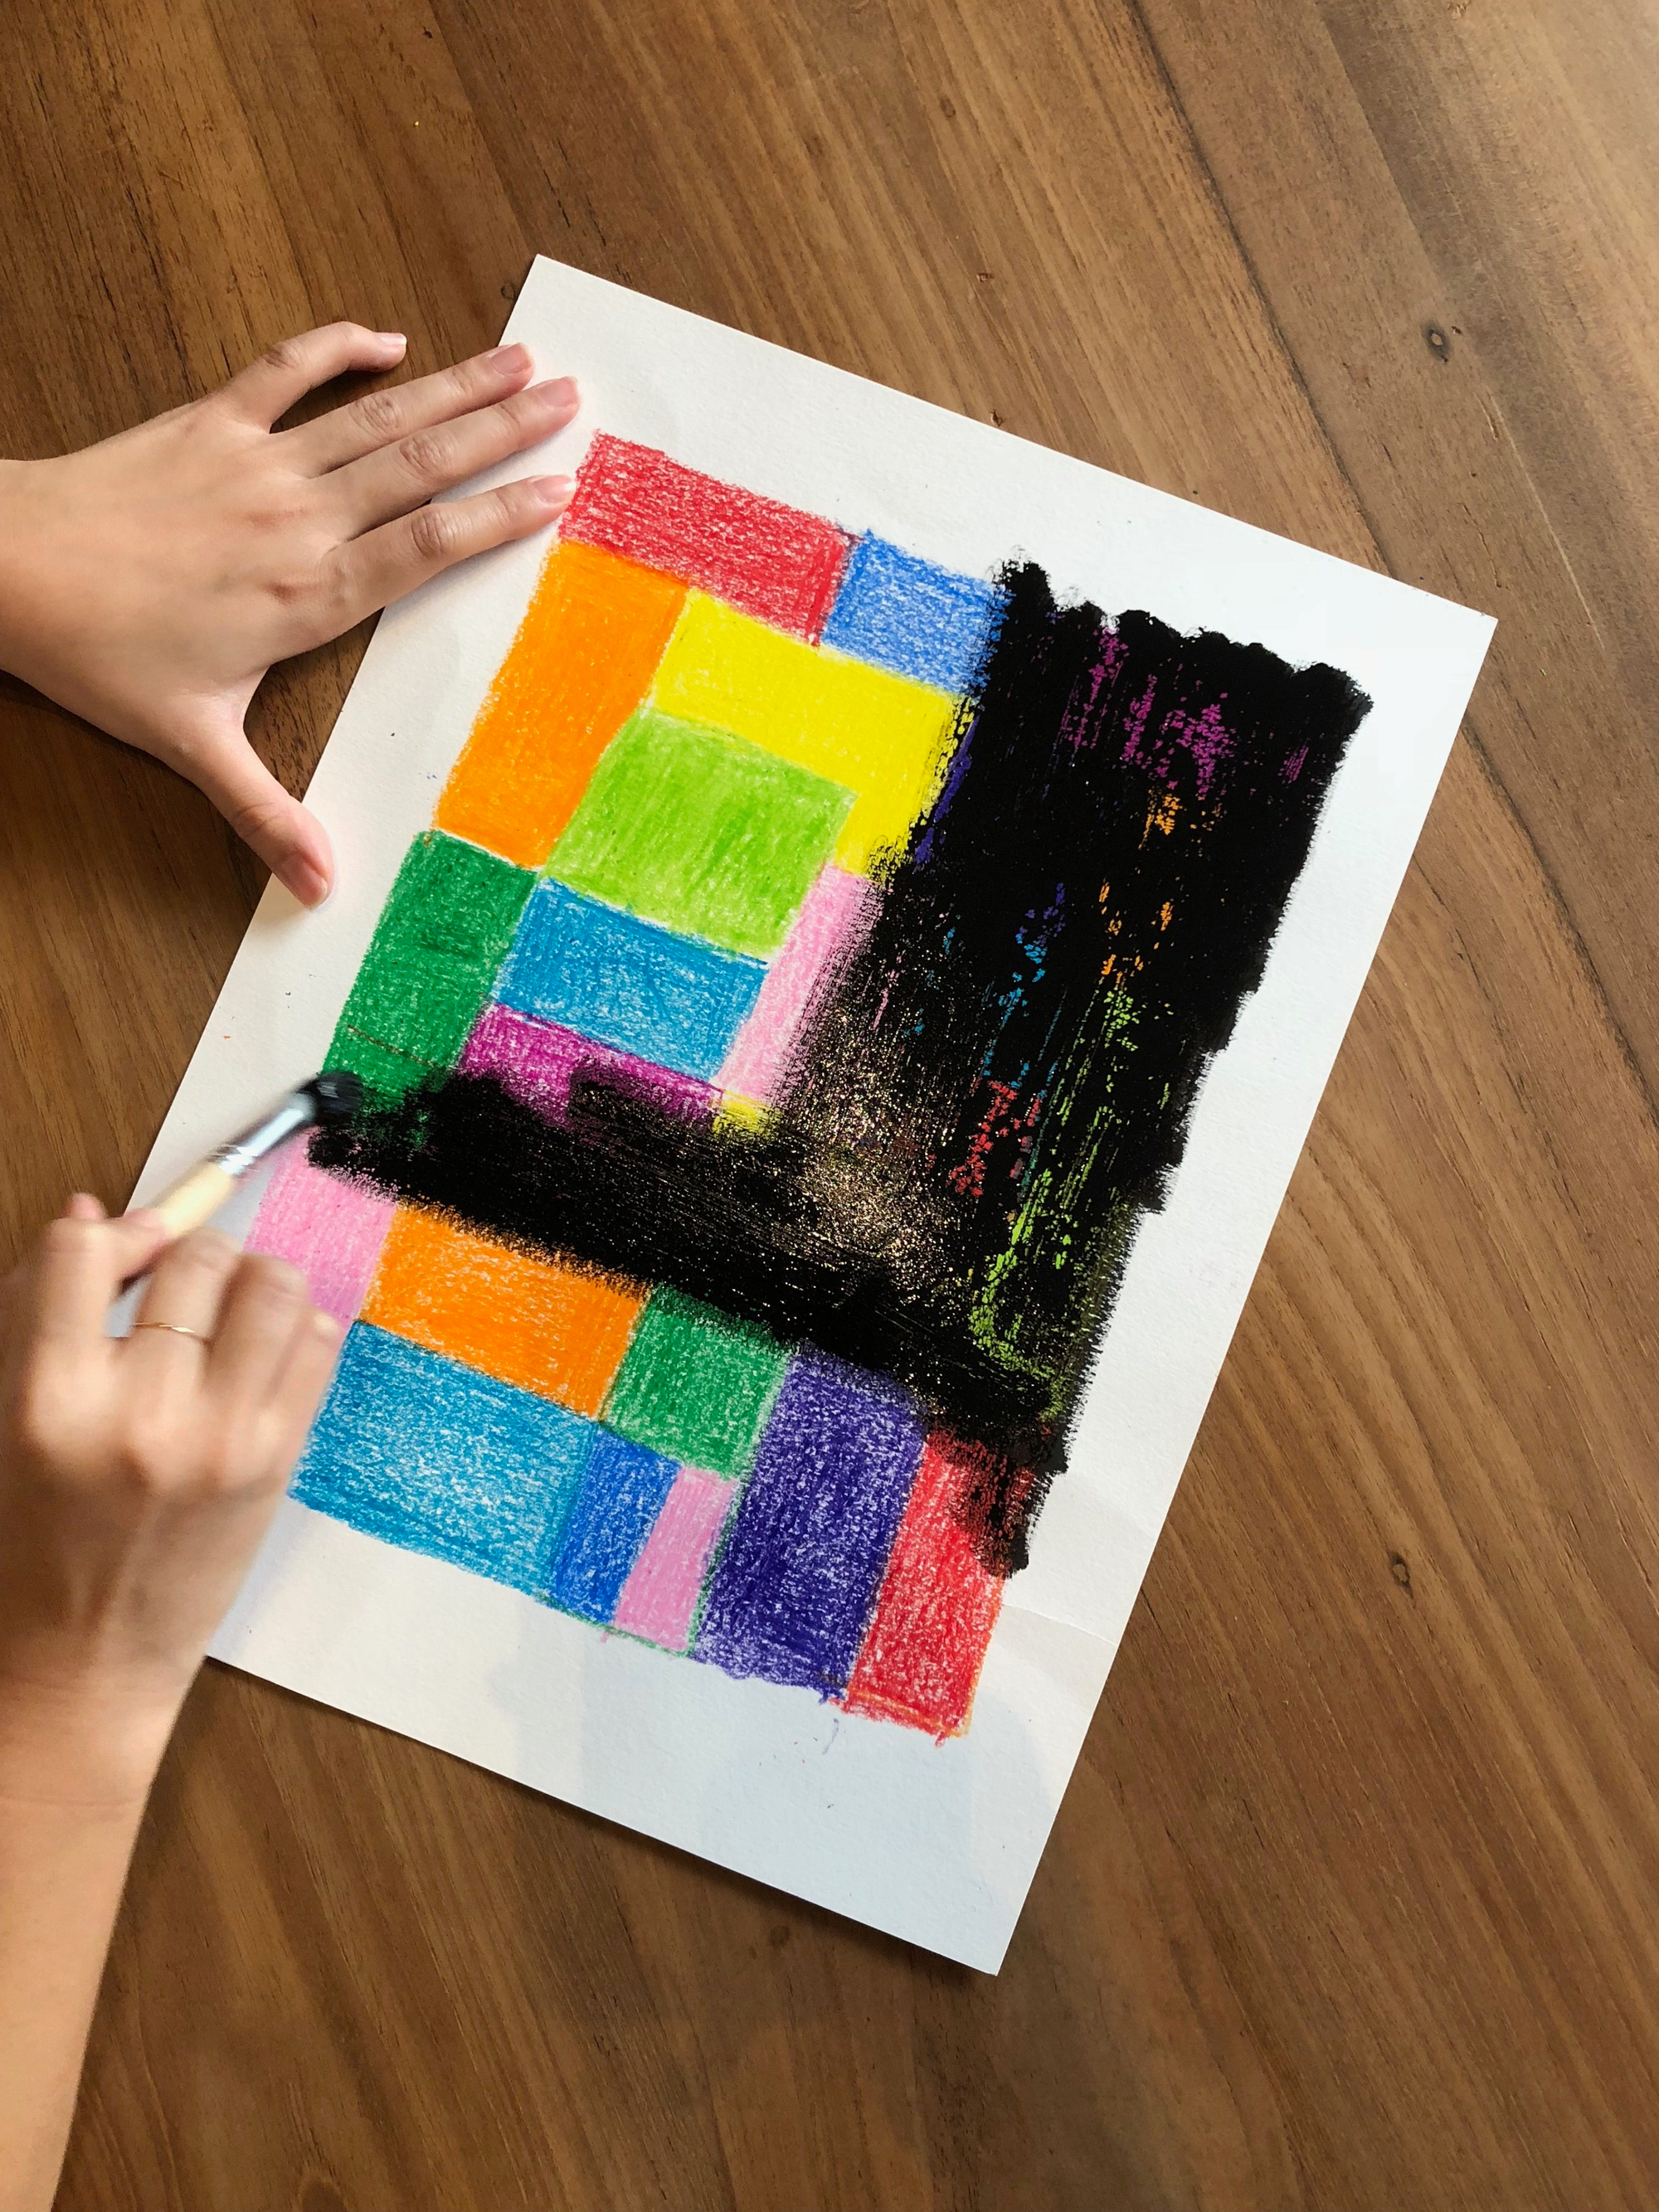 Can You Use Acrylic Paint Over Crayon? Unlocking Creative Potential